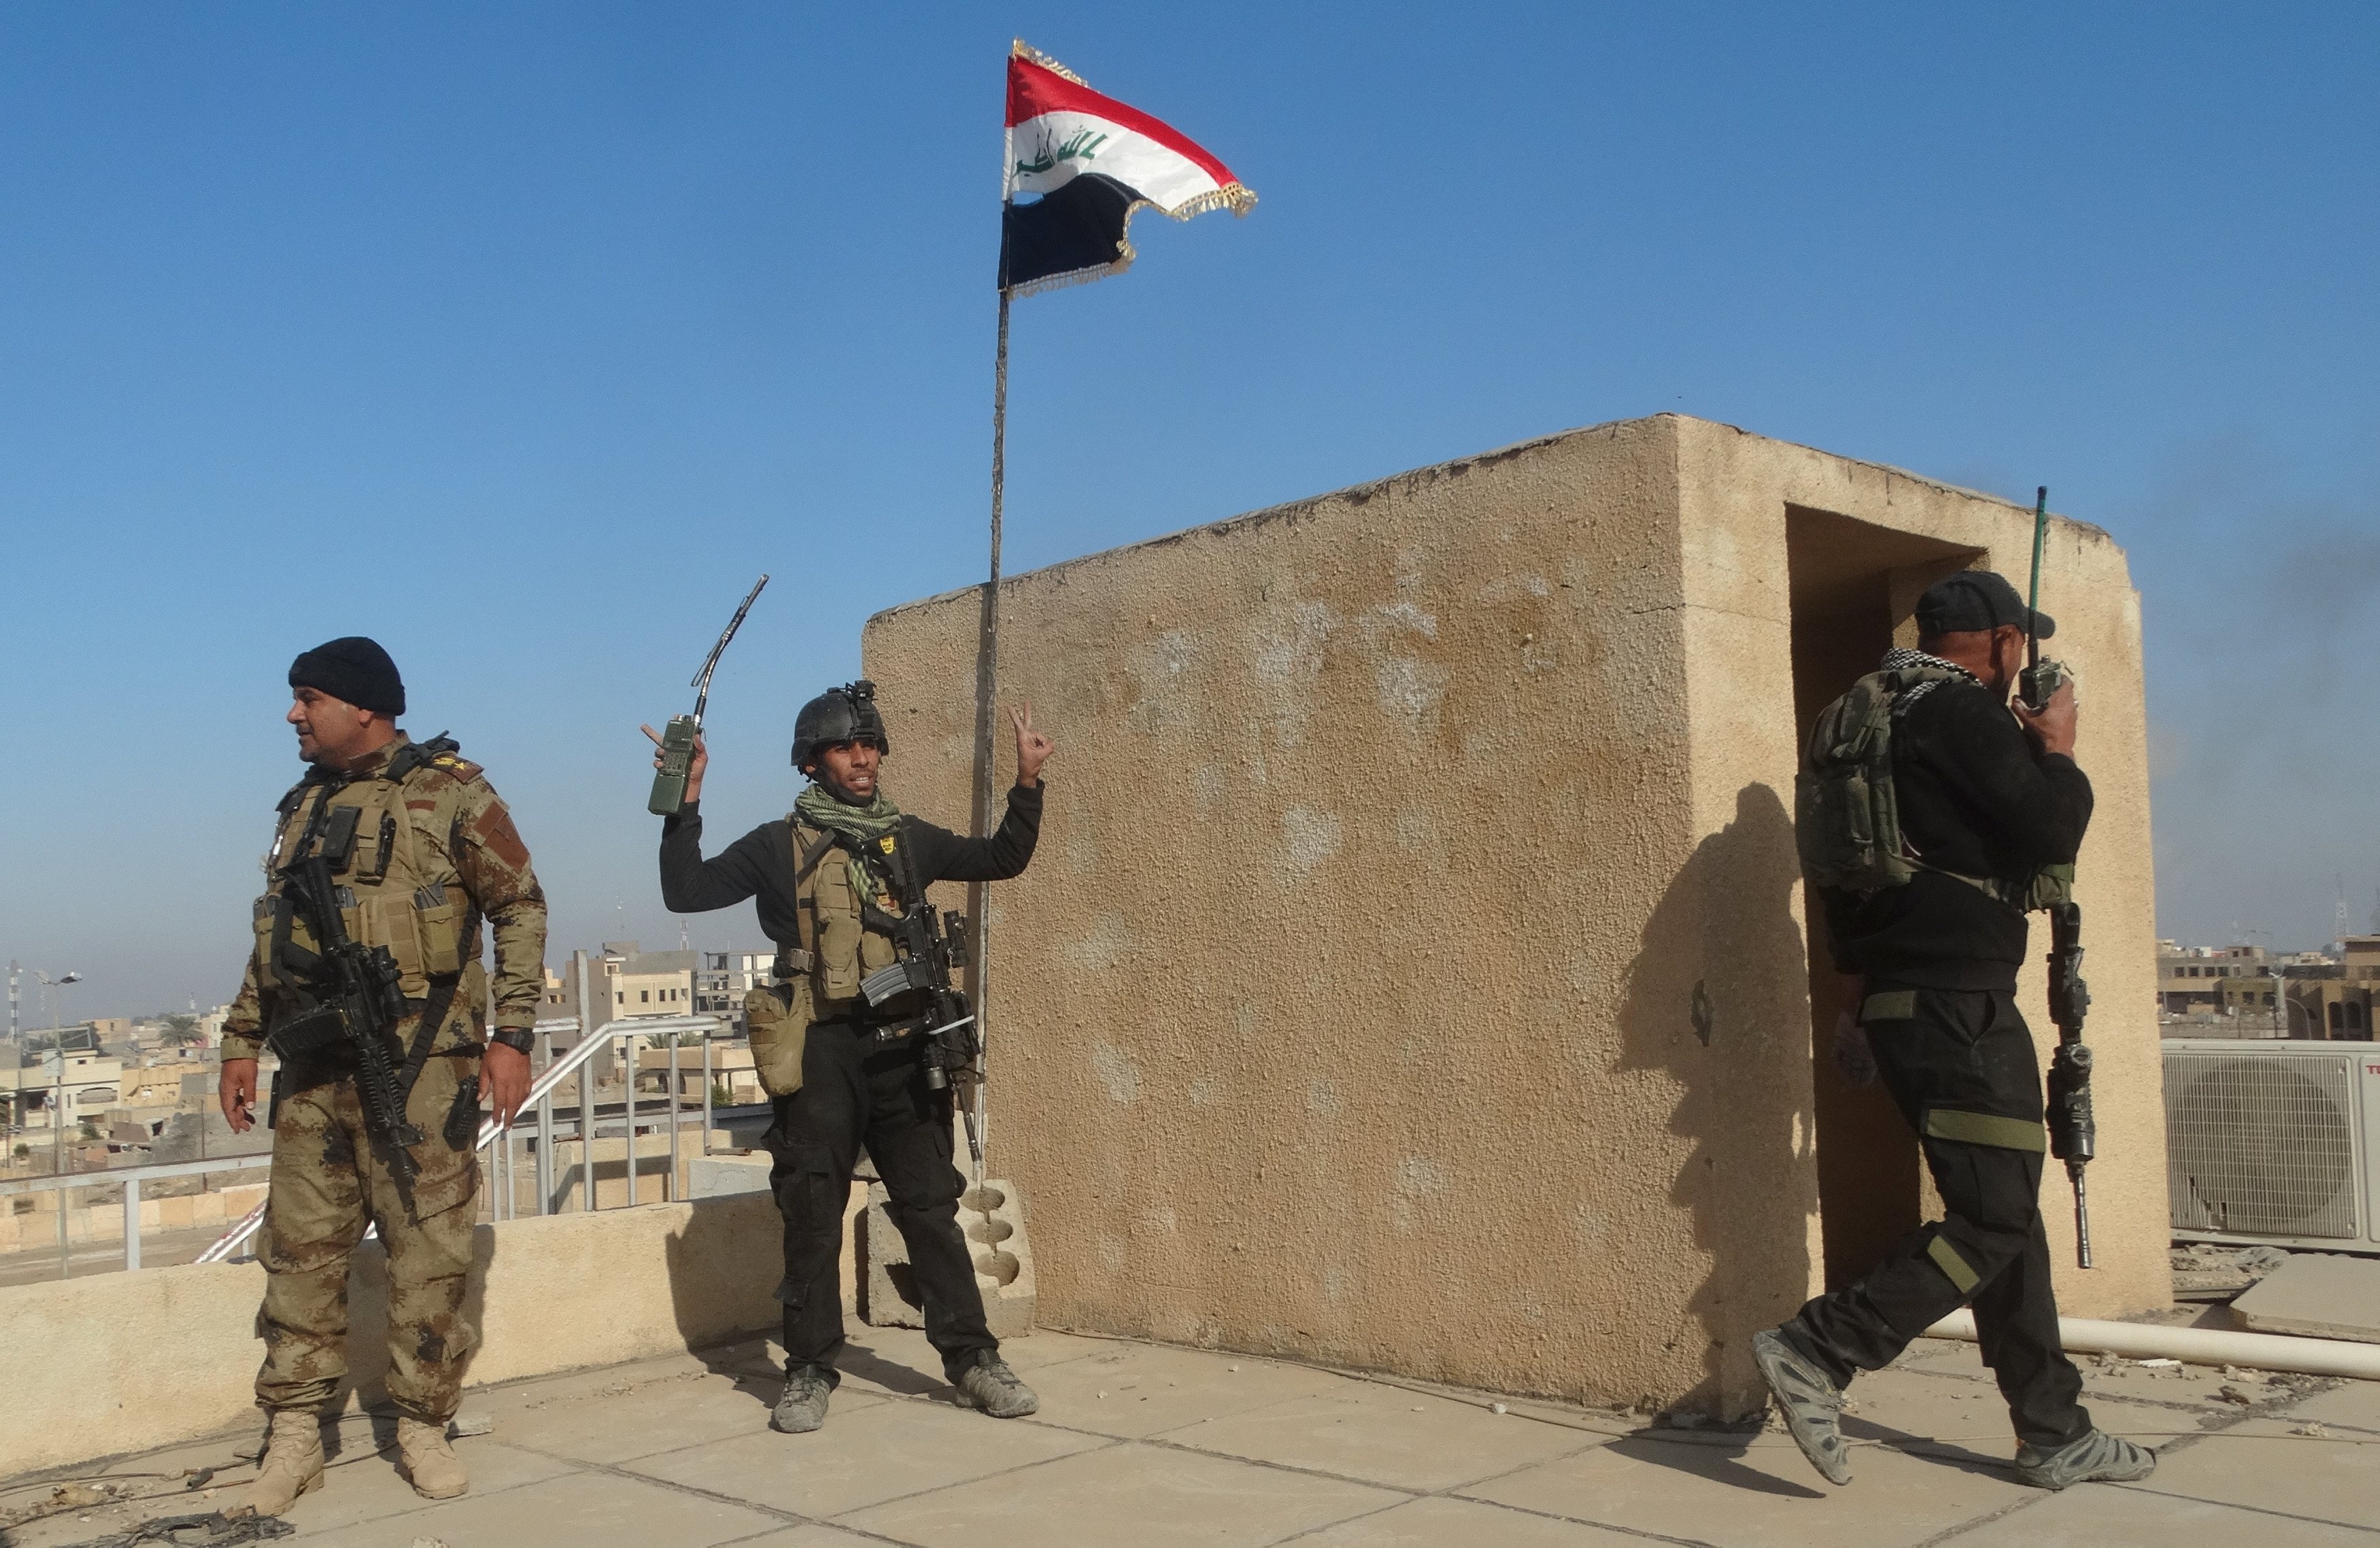 Iraqi security forces gather at a government complex in the city of Ramadi, December 28, 2015. Photo: Reuters